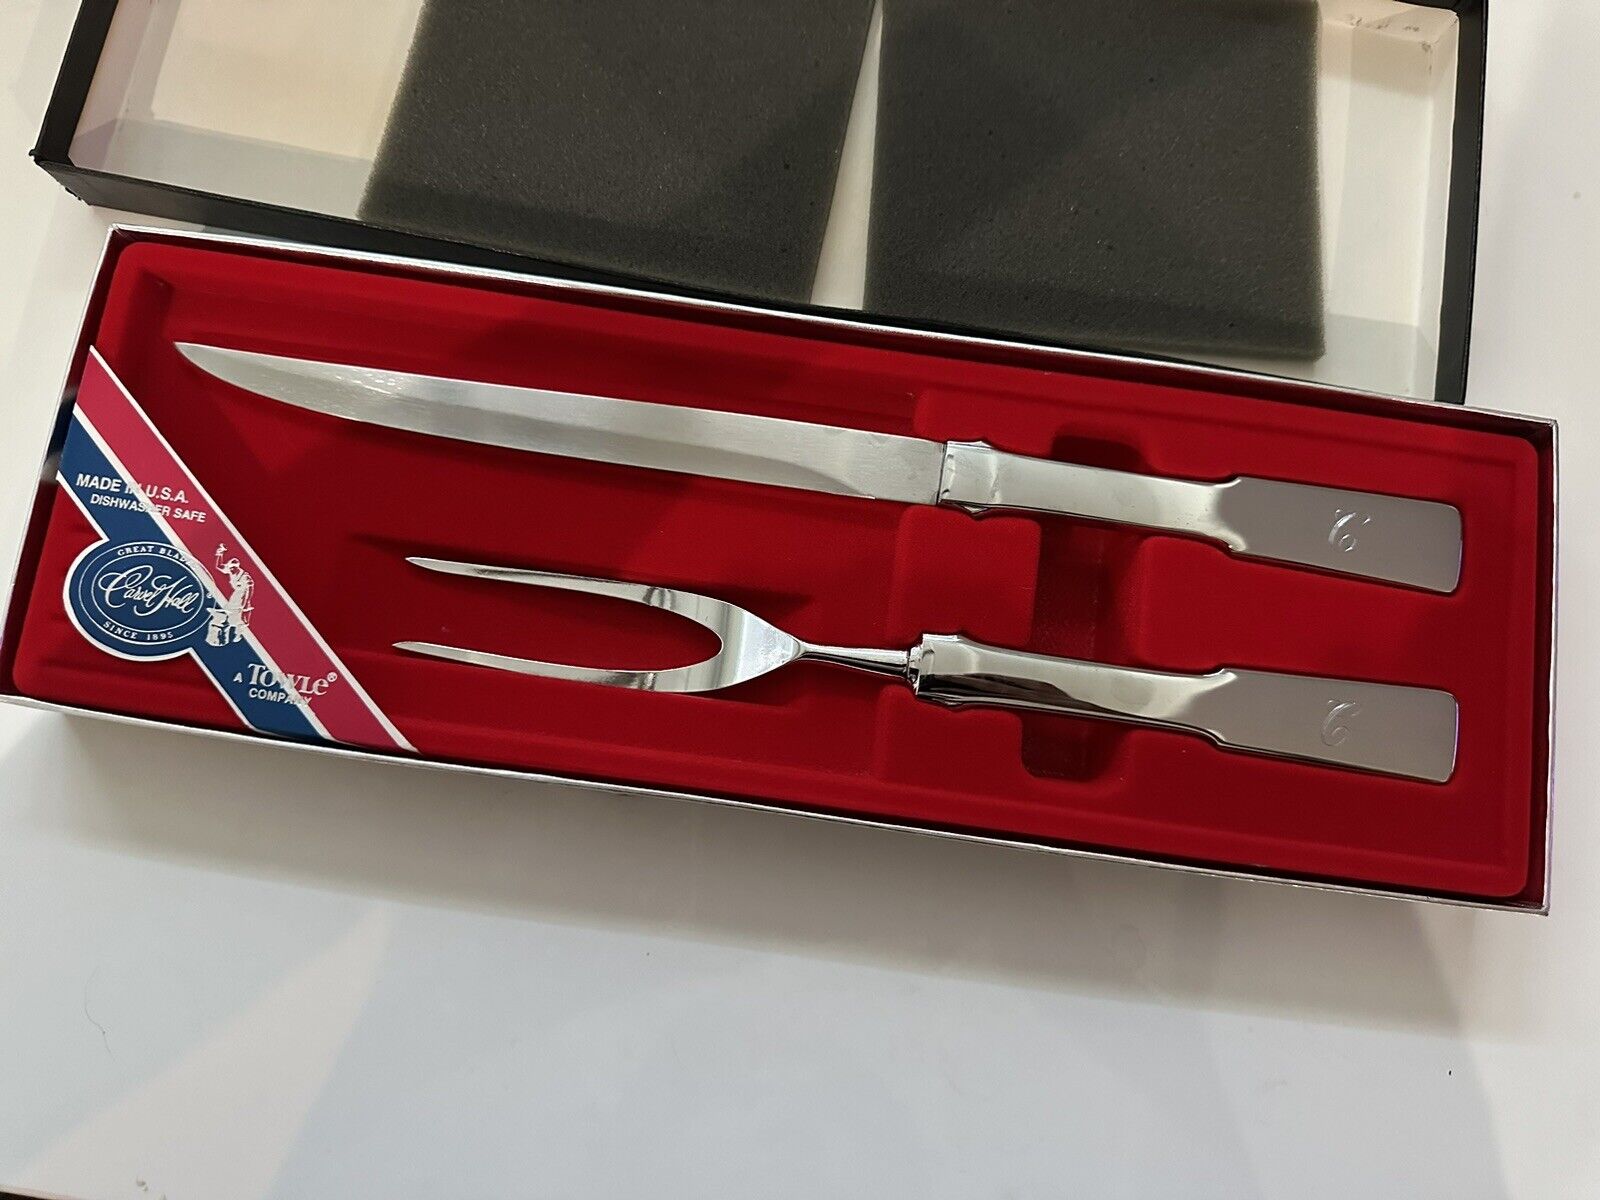 NEW Carvel Hall Silver Knife Fork Serving Set MADE IN USA